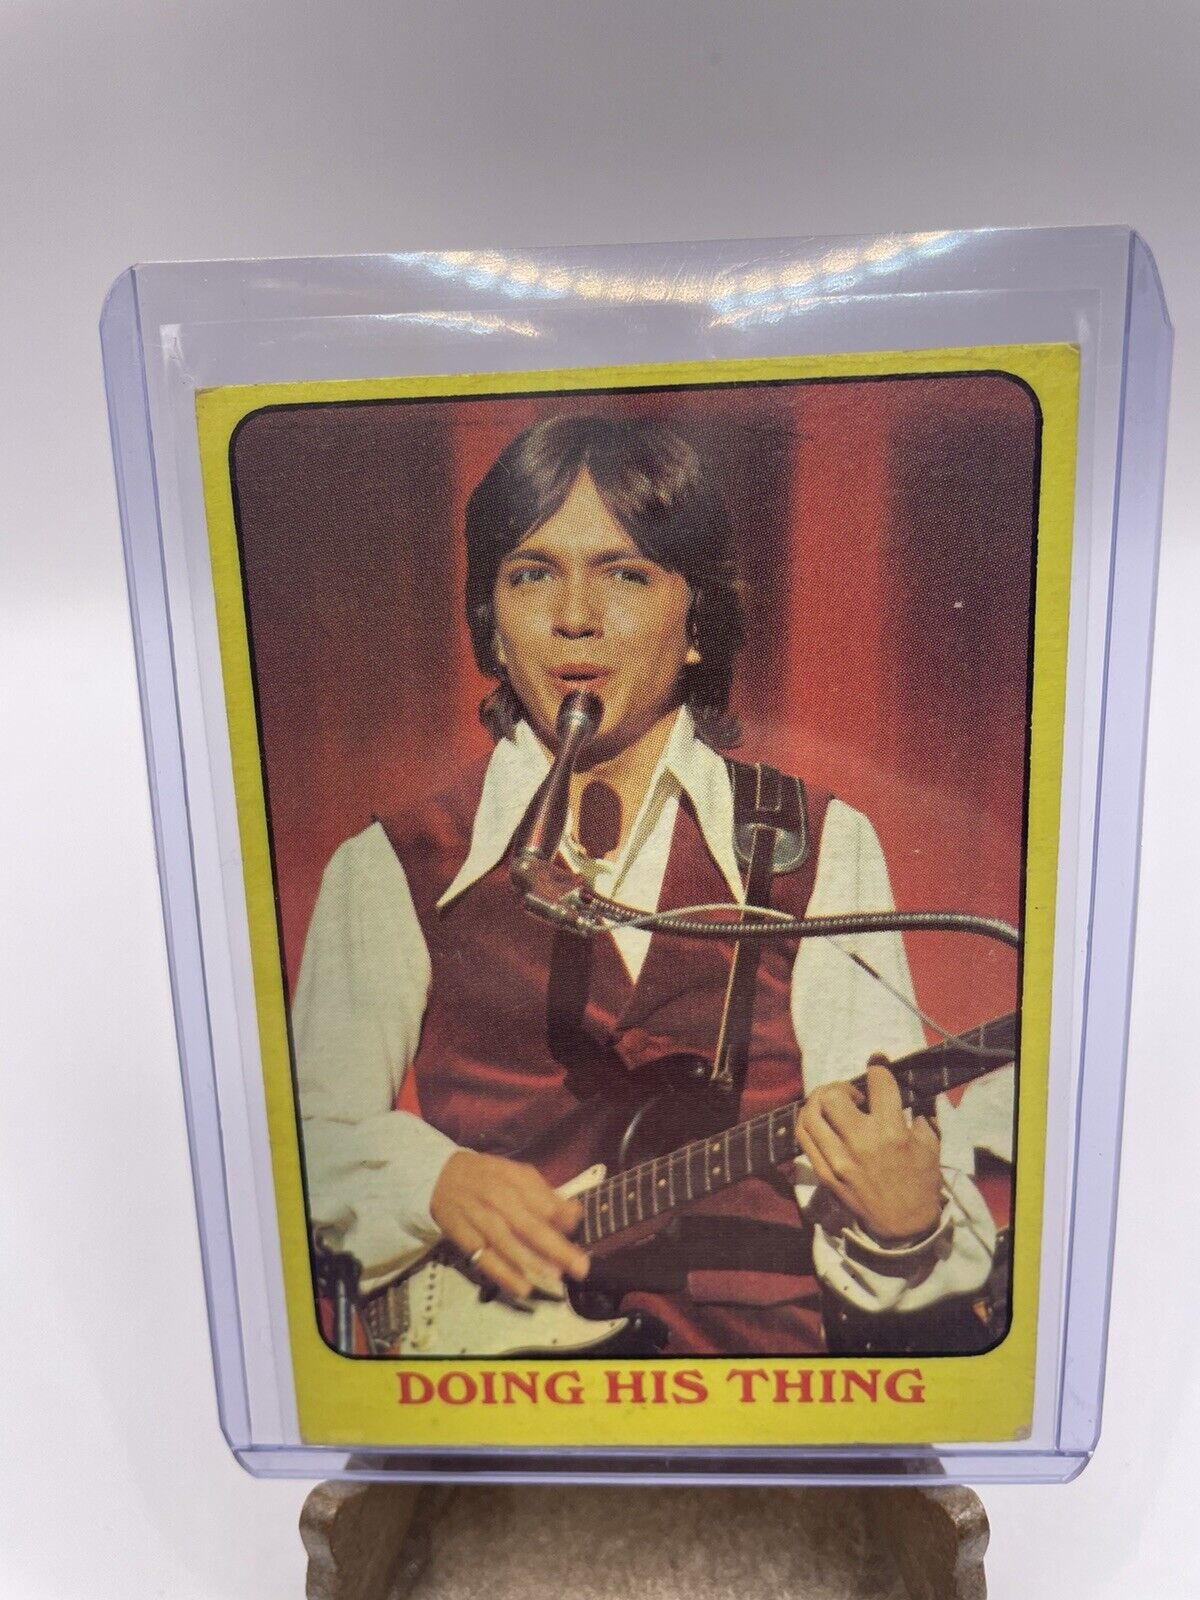 The Partridge Family Series One 1971 TOPPS CARD #24 ‘Doing His Thing’